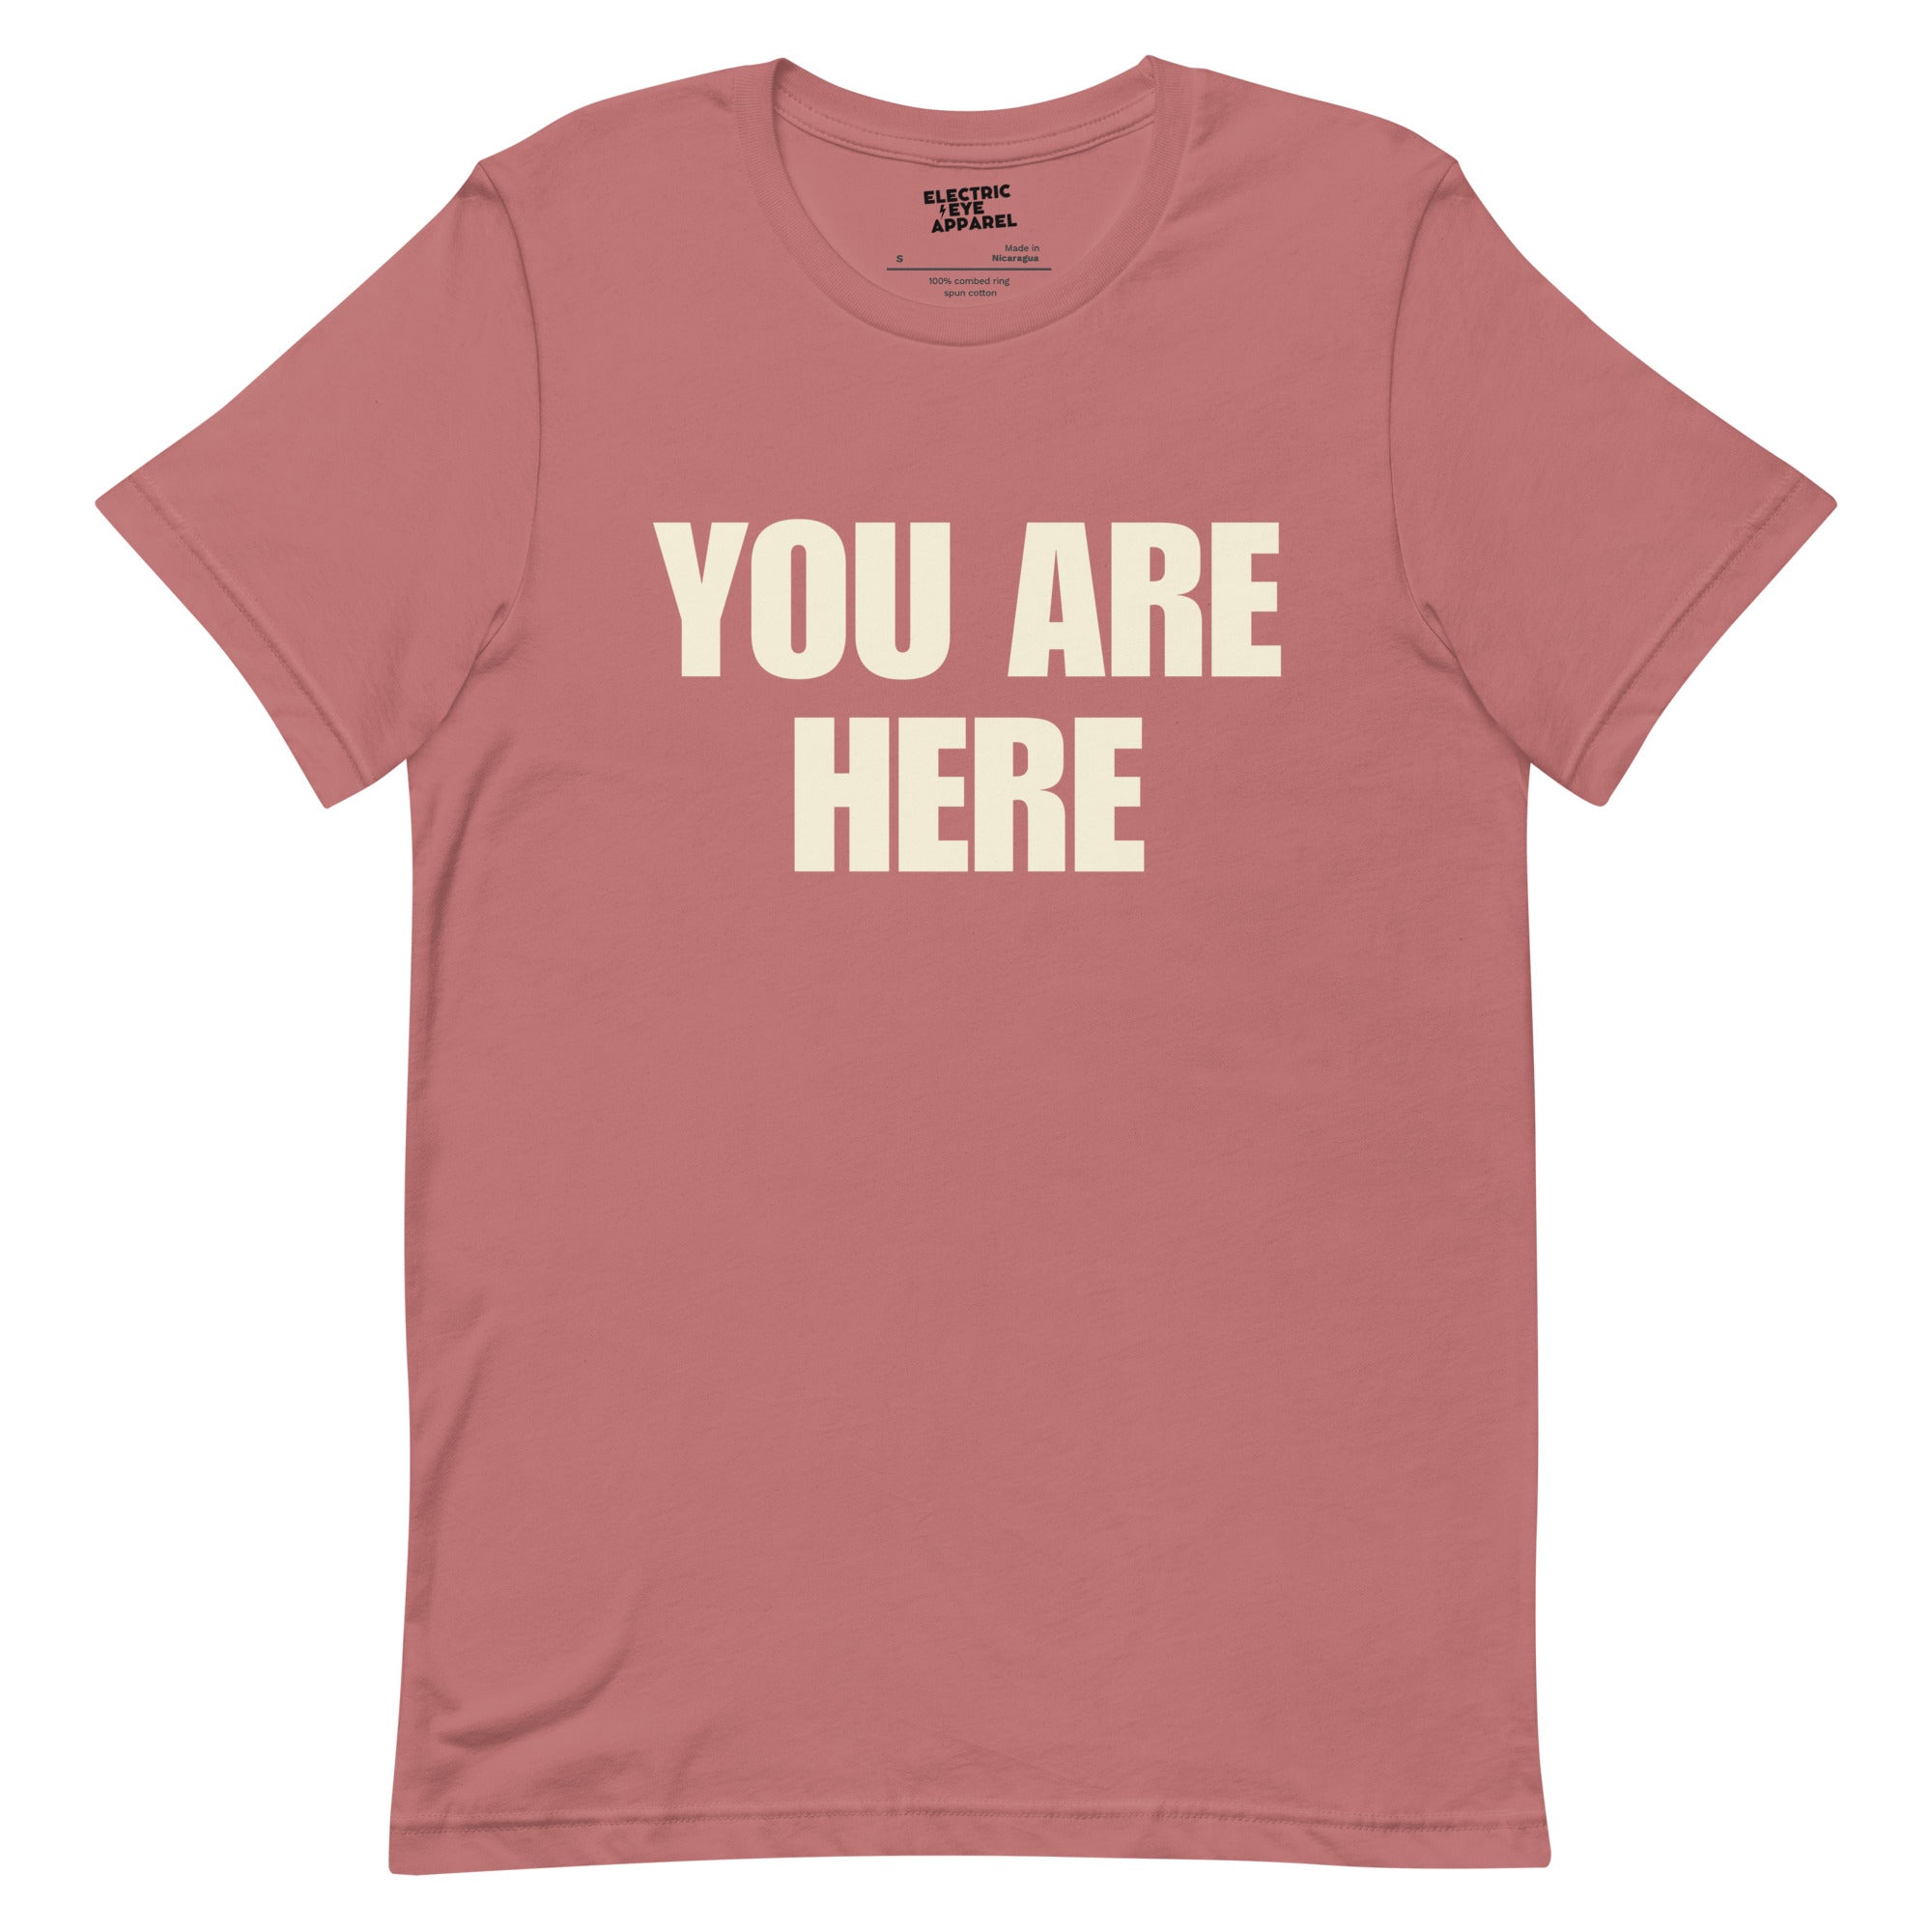 John Lennon Inspired Vintage 70s Style 'YOU ARE HERE' Premium Printed Unisex t-shirt